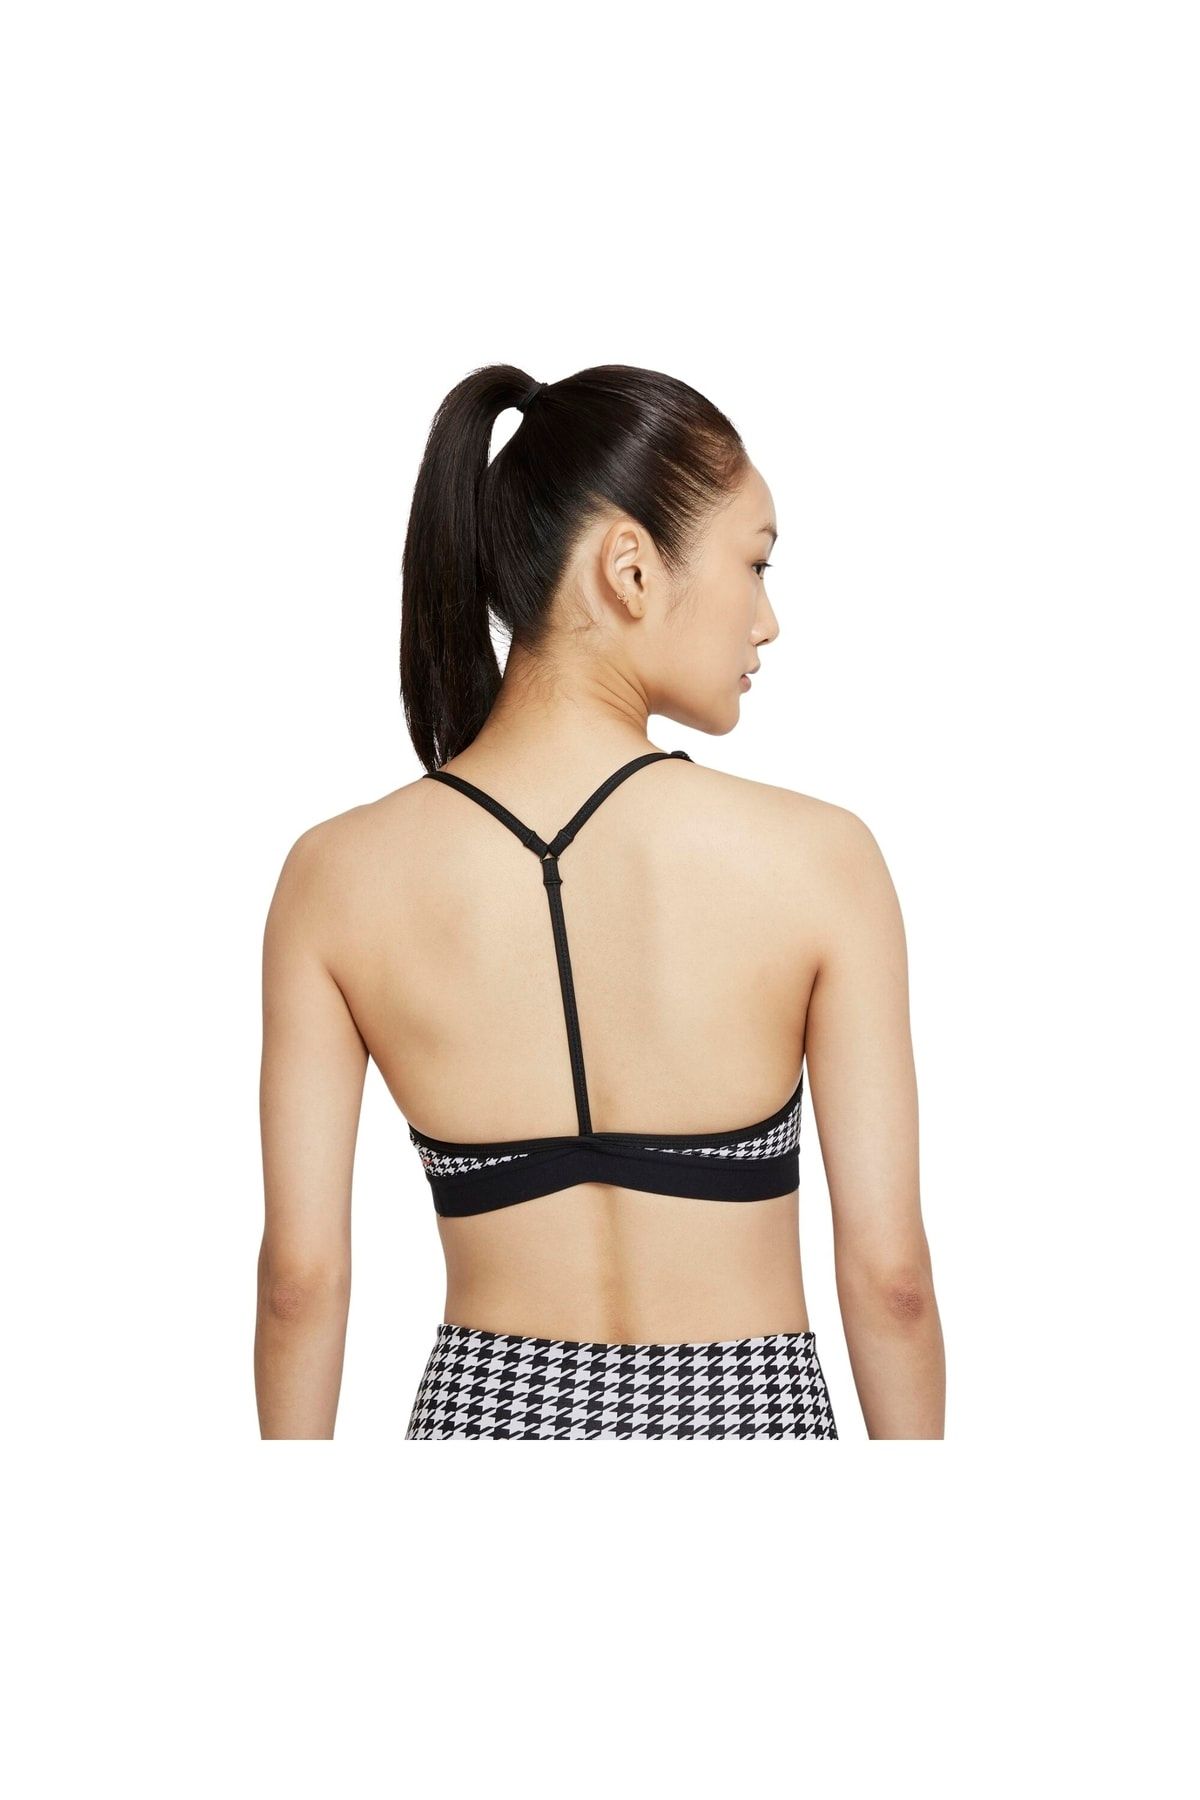 Nike Indy Icon Clash Women's Light-Support Sports Bra